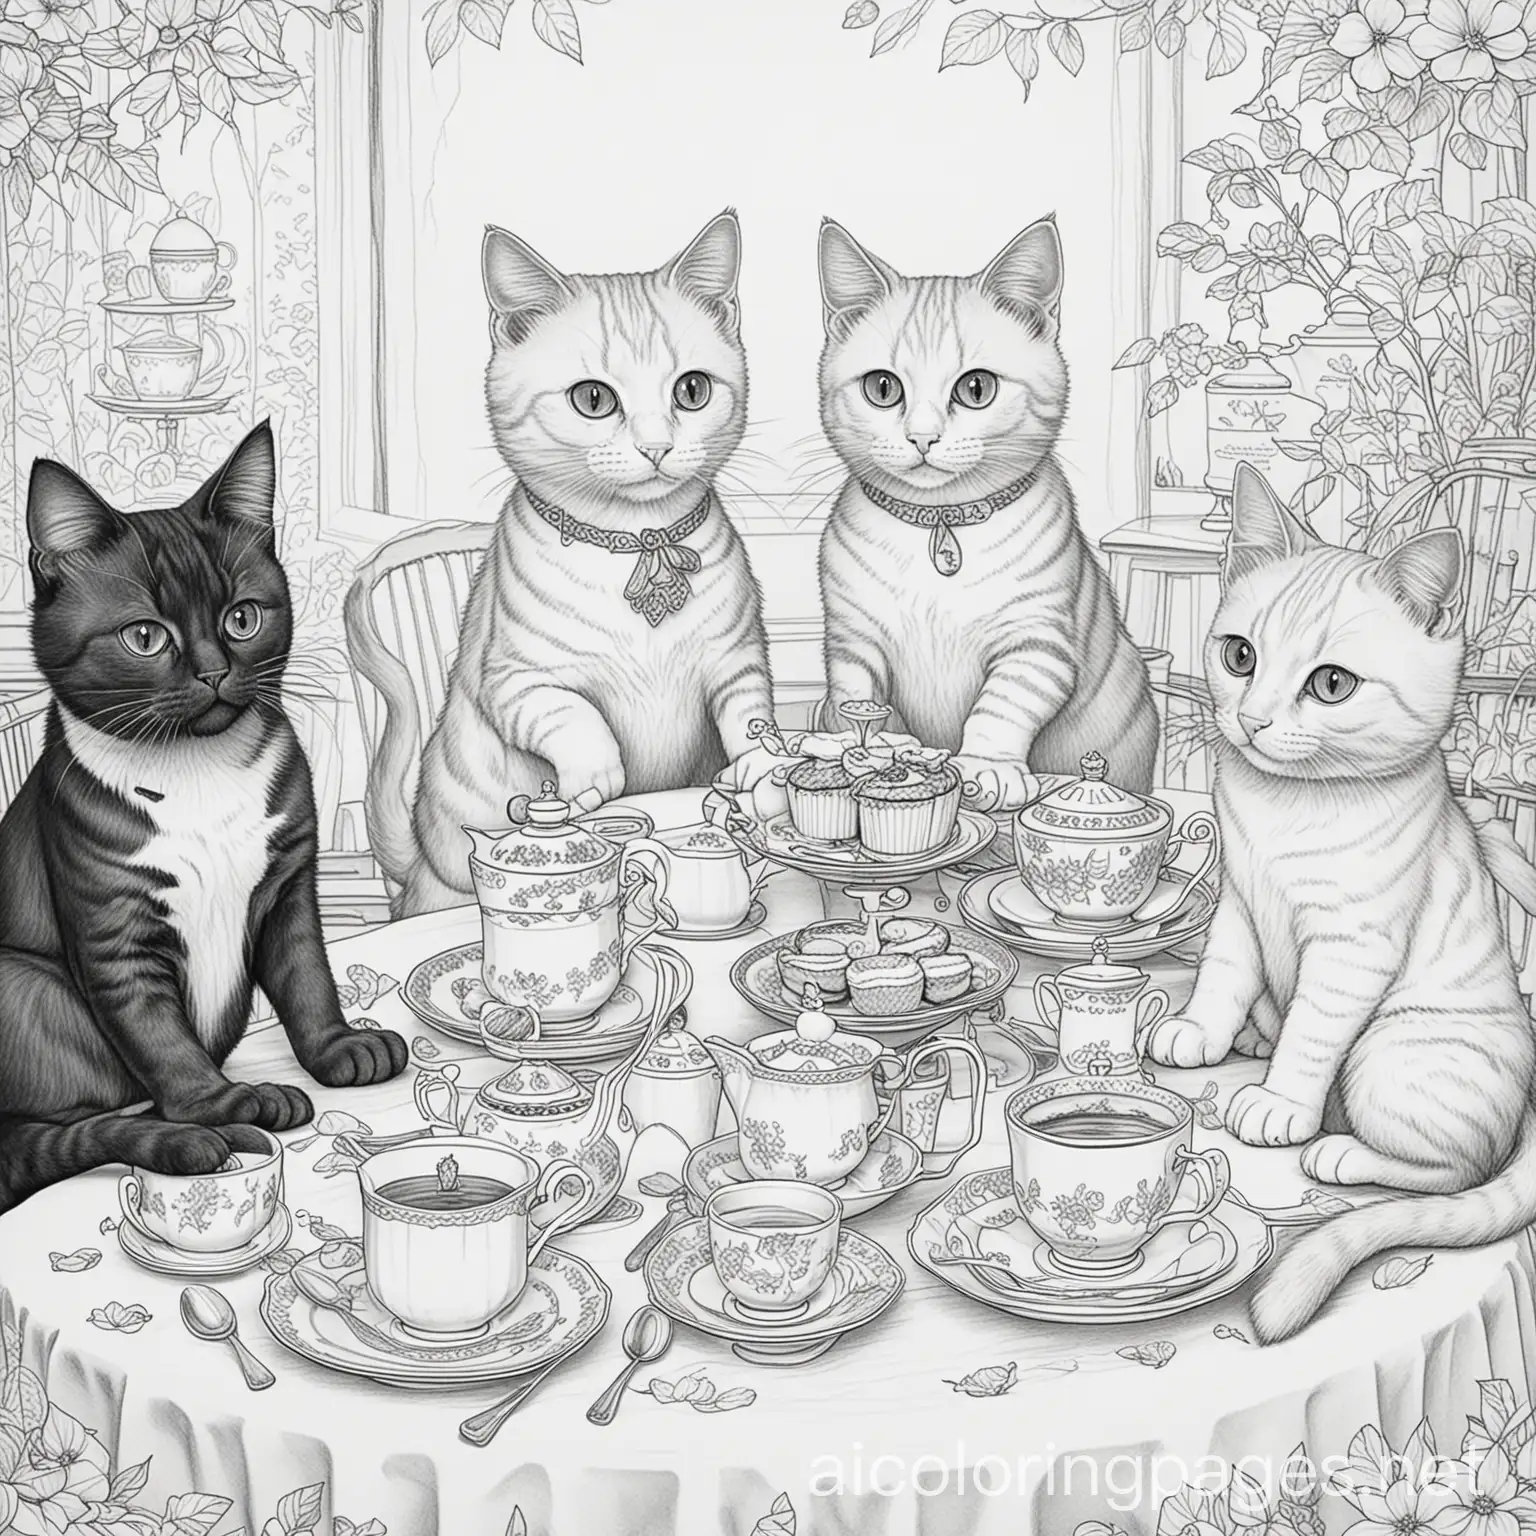 Cats-Tea-Party-Coloring-Page-with-97-Pieces-to-Color